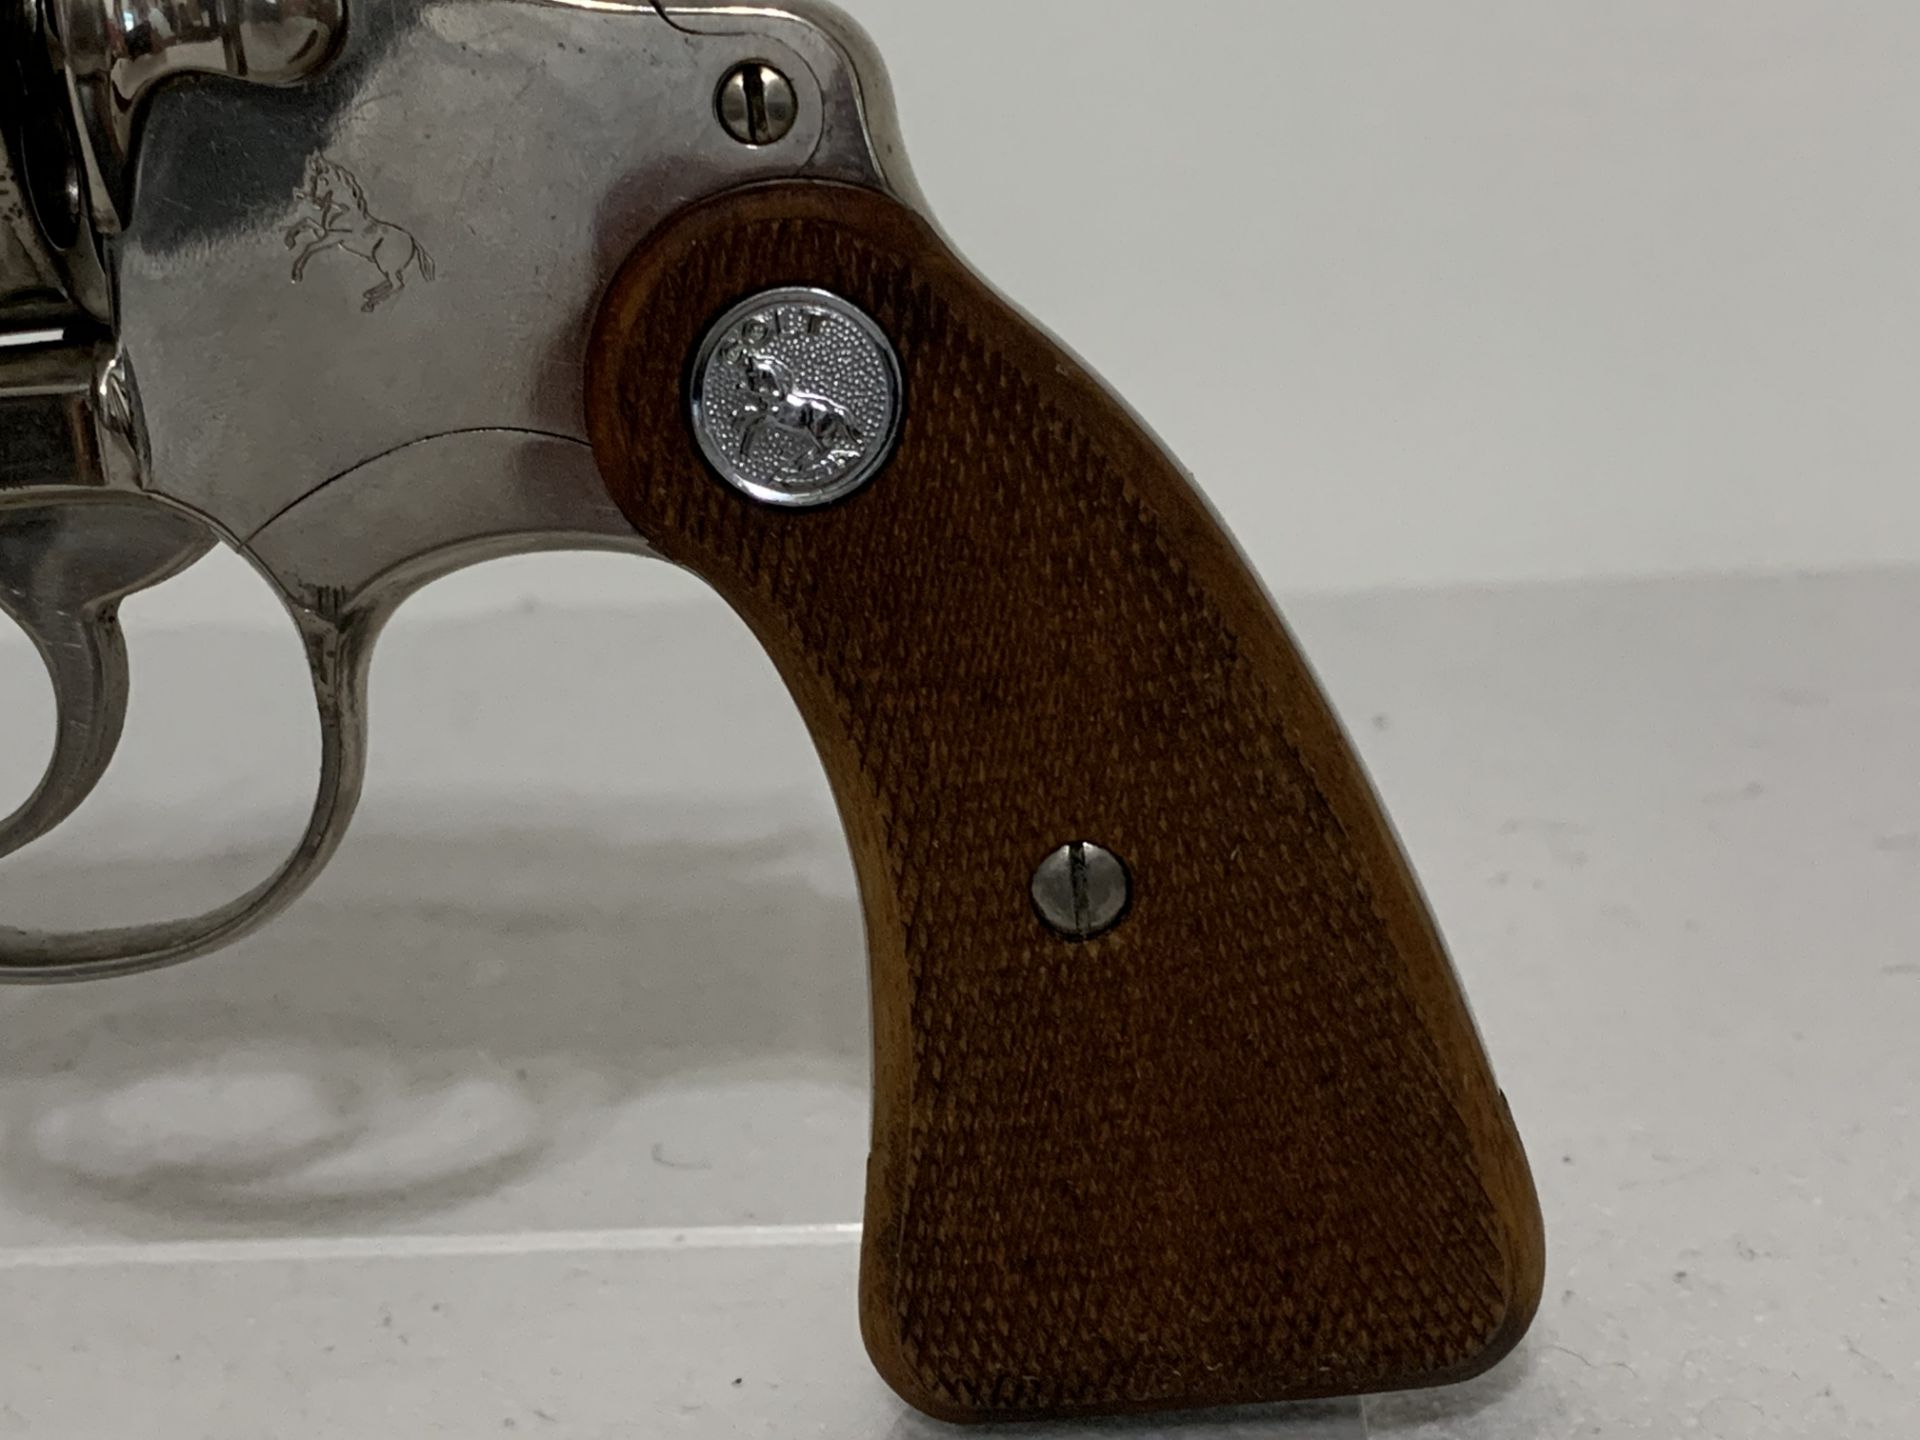 COLT DETECTIVE SPECIAL PISTOL - 38 CAL - NICKEL - WITH ORIGINAL 1971 GRIPS (FOB HOLLYWOOD, FL) - Image 4 of 11